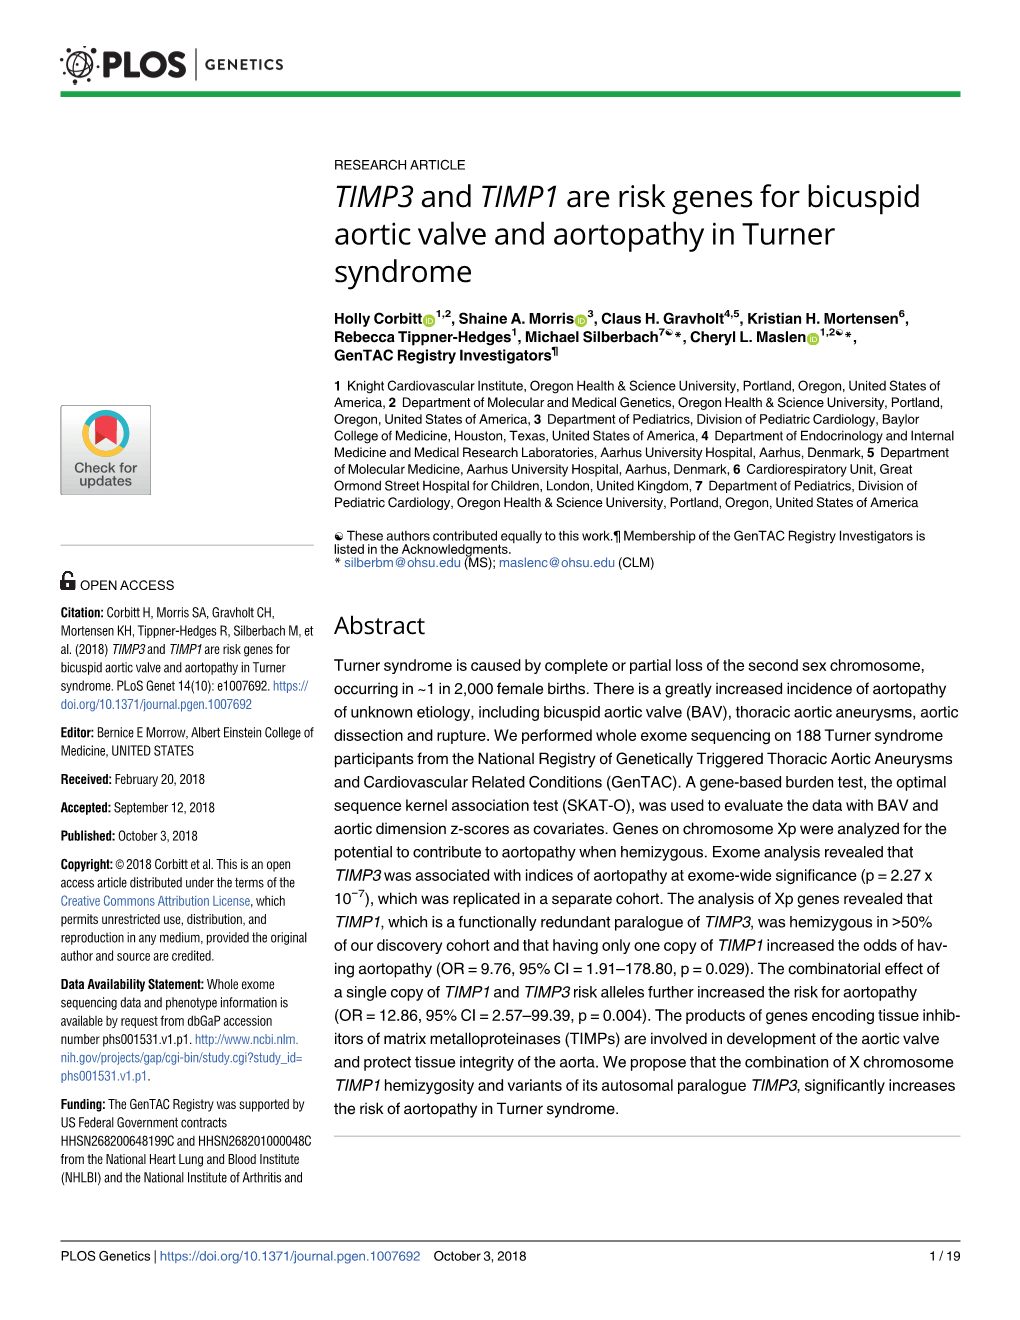 TIMP3 and TIMP1 Are Risk Genes for Bicuspid Aortic Valve and Aortopathy in Turner Syndrome